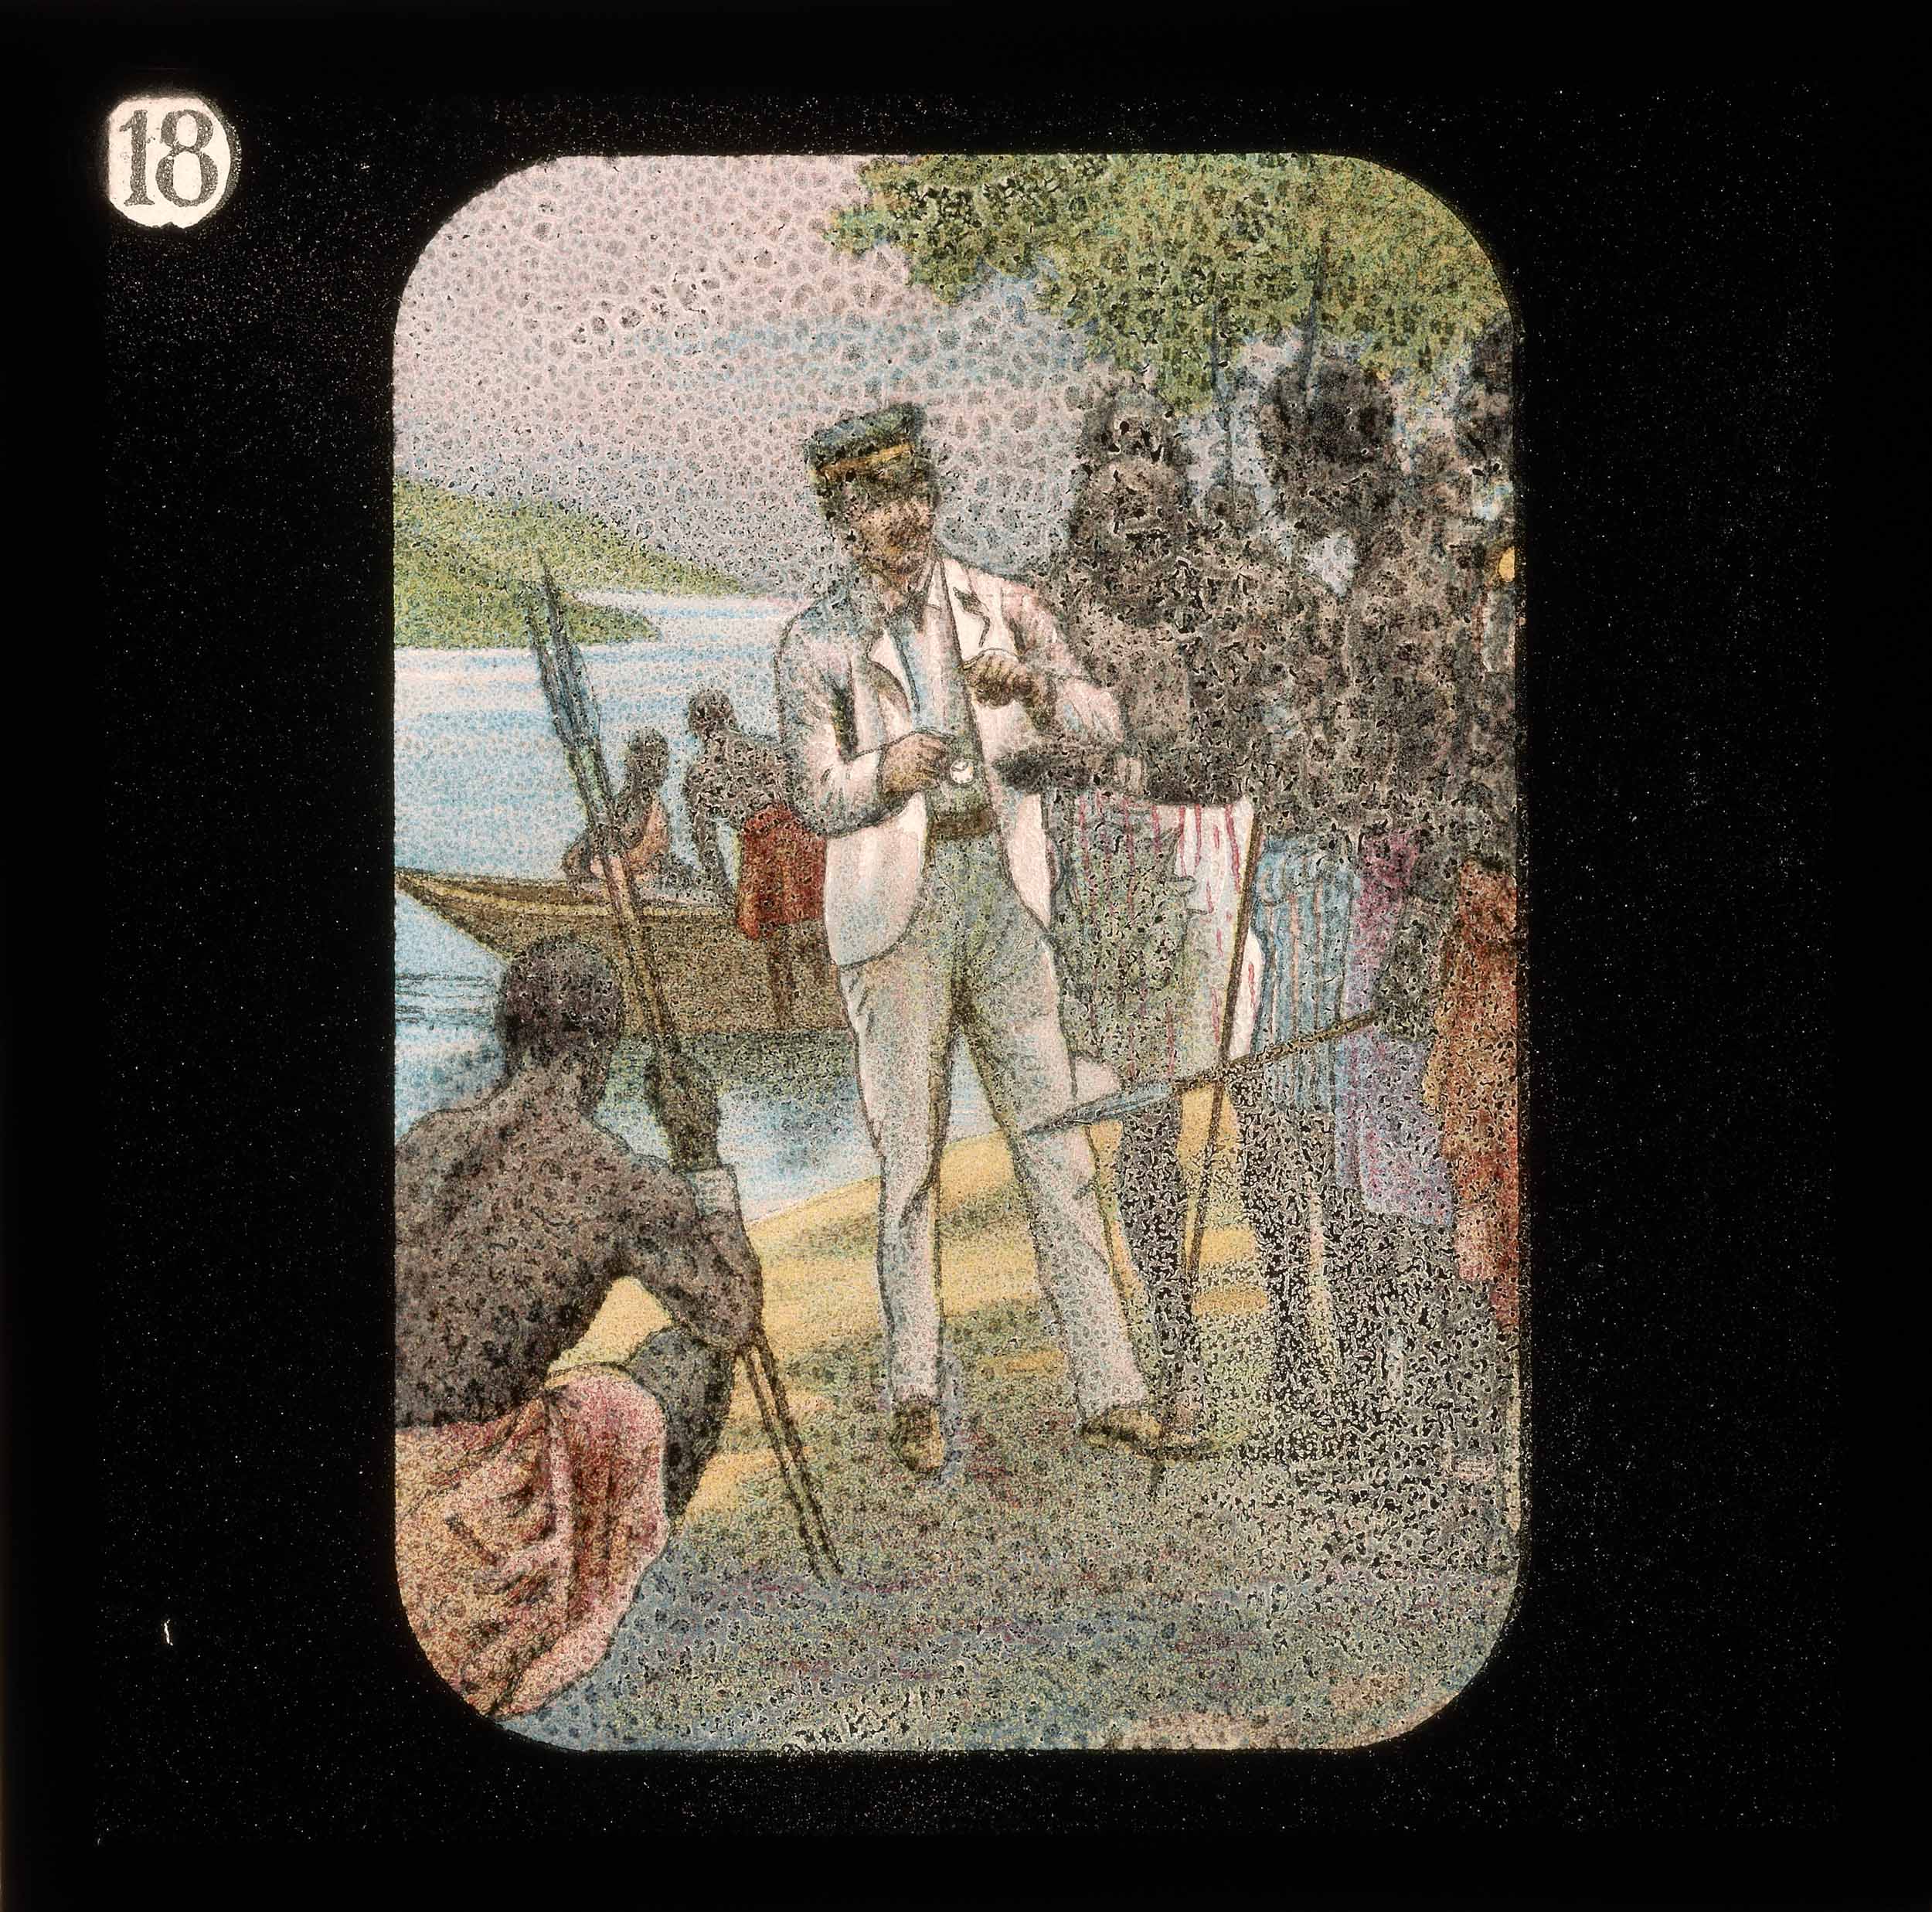 Lantern Slides of the Life, Adventures, and Work of David Livingstone. Courtesy of the Smithsonian Libraries, Washington, D.C.